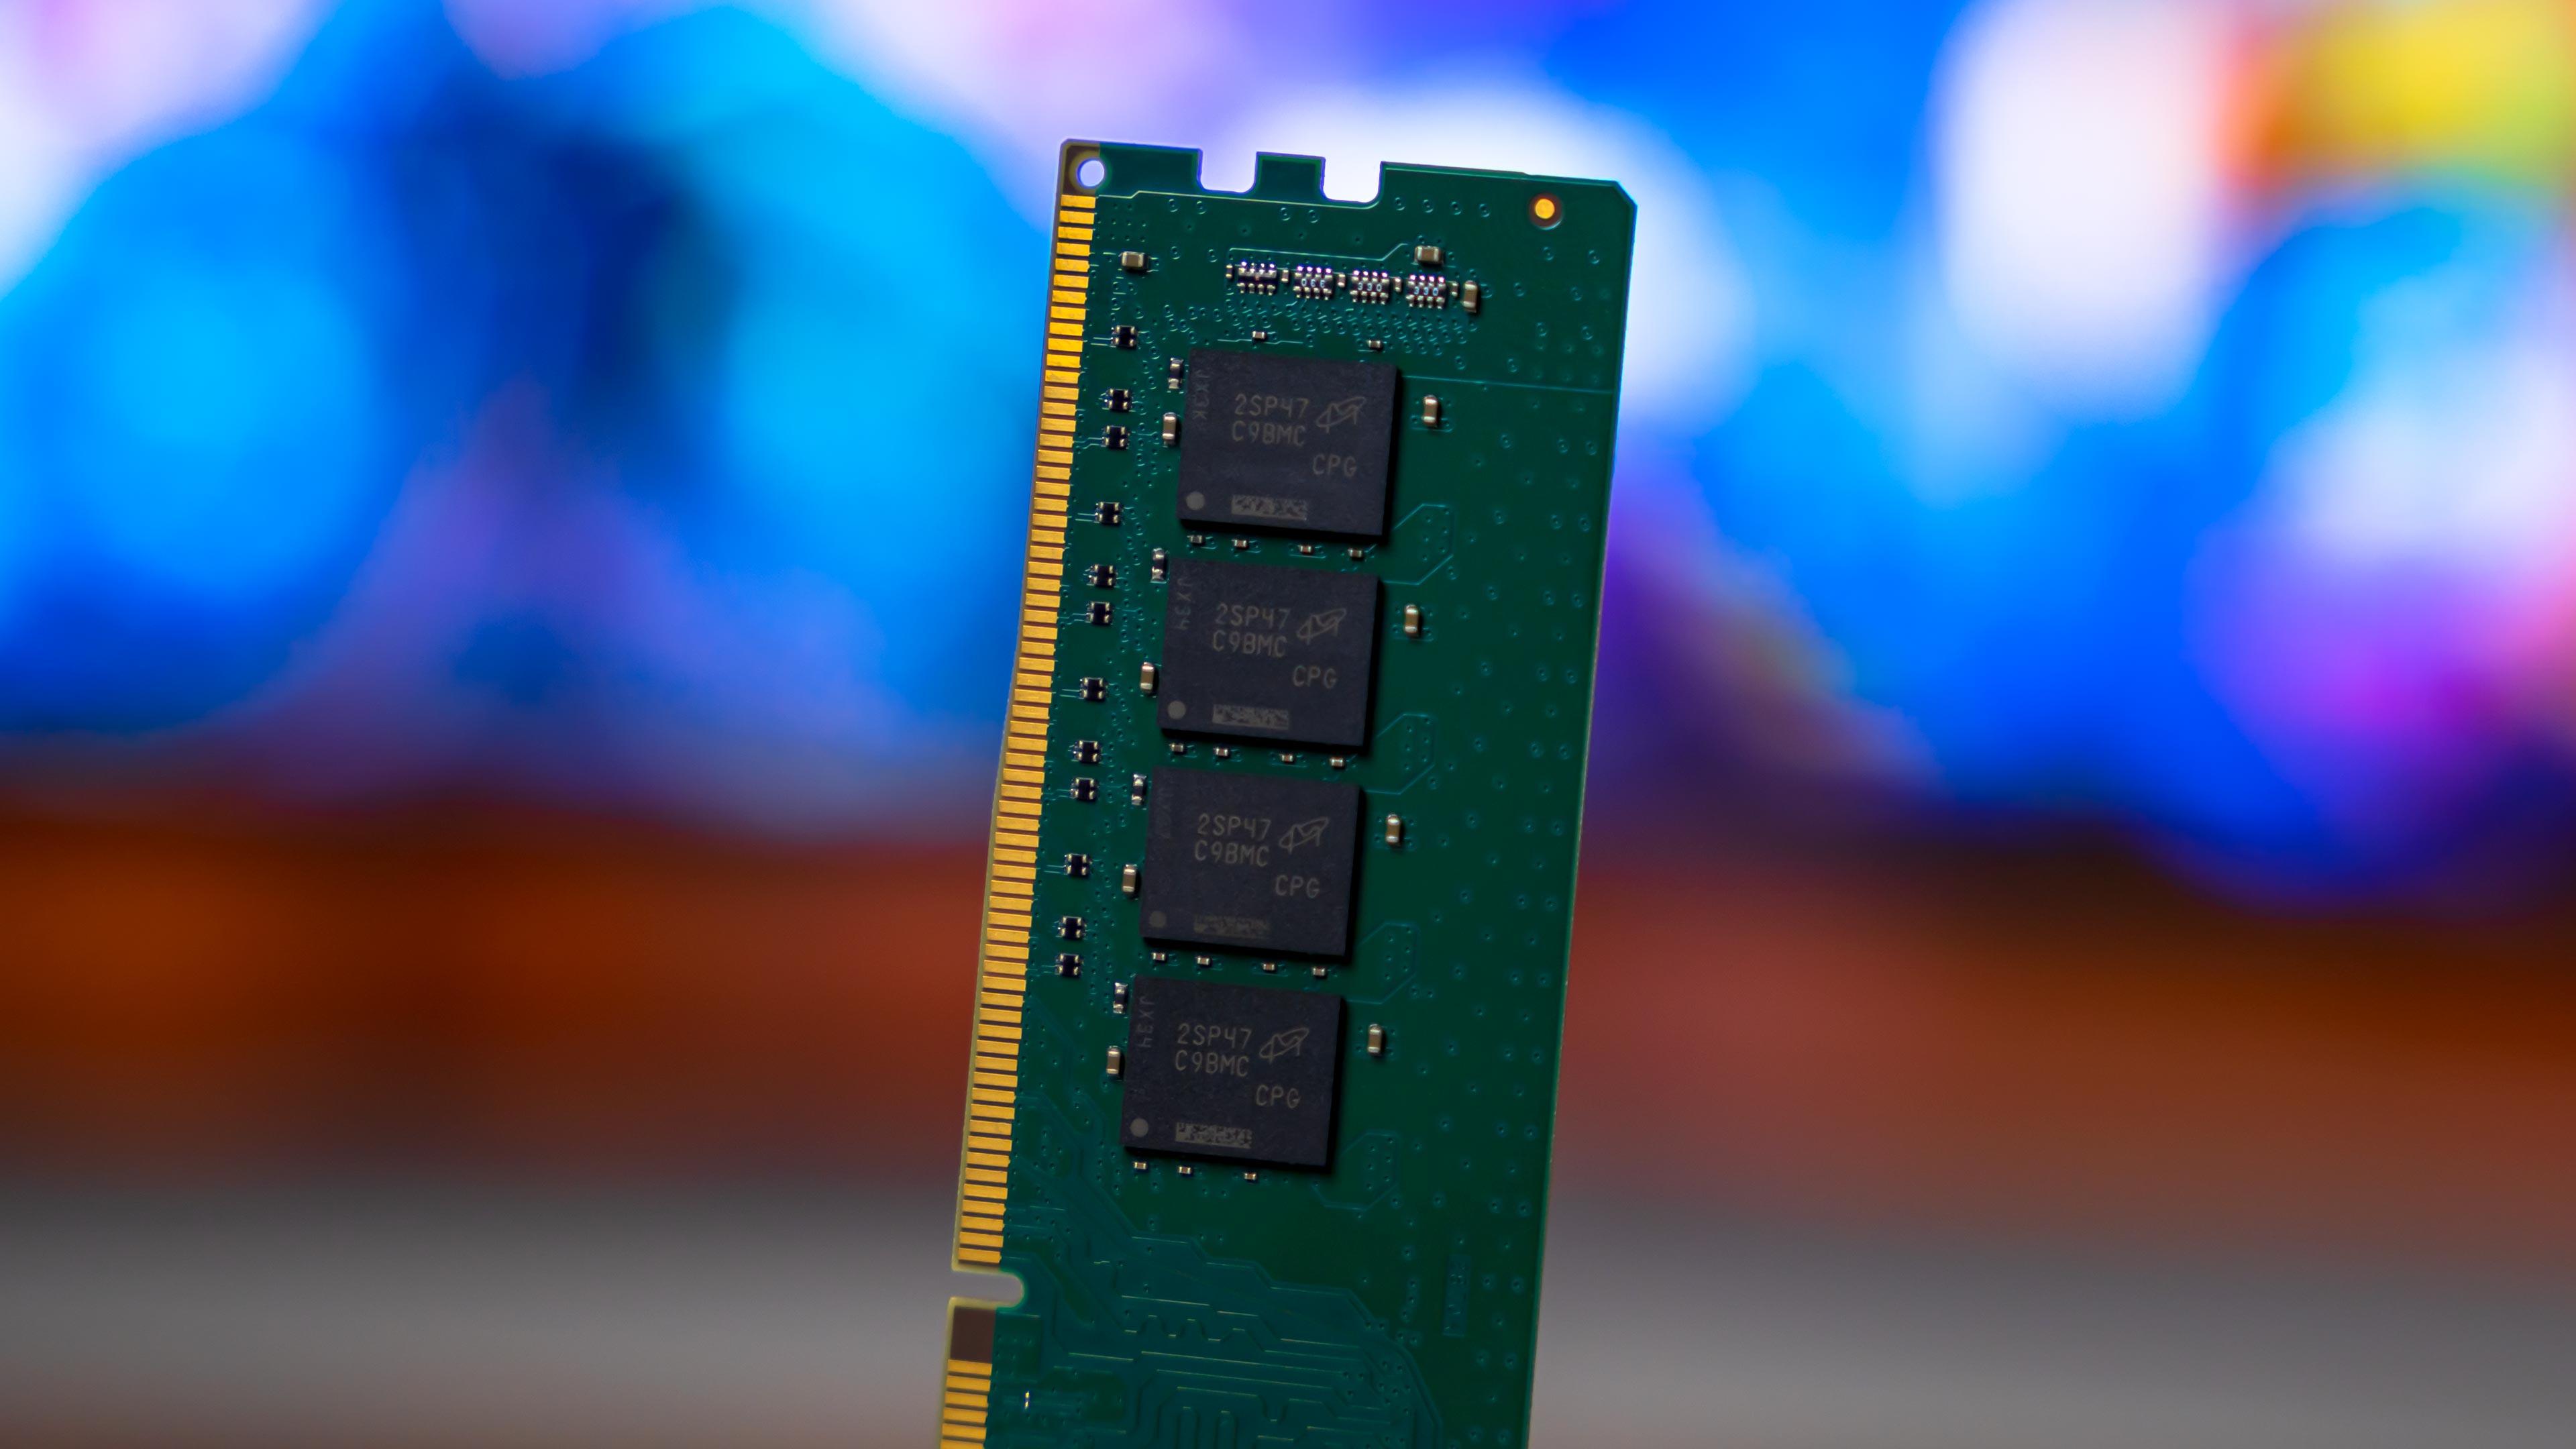 Crucial DDR4 2666Mhz Memory (3)